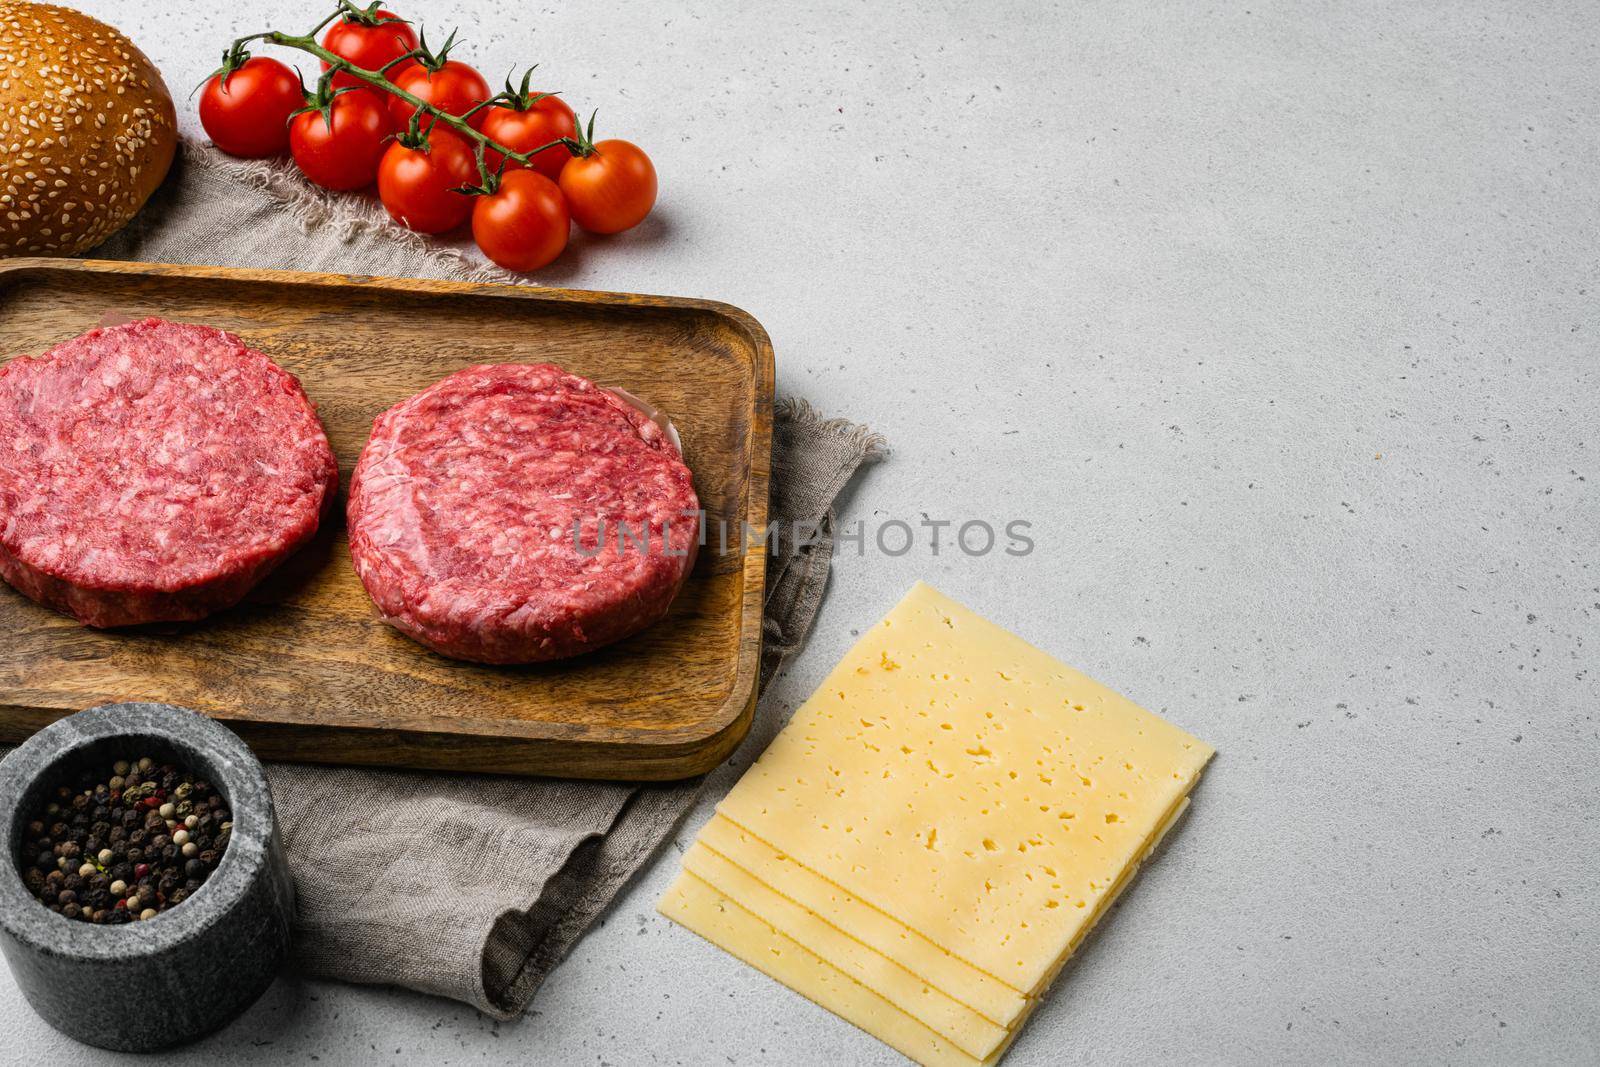 Home Handmade Raw Minced Beef steak burgers, on gray stone table background, with copy space for text